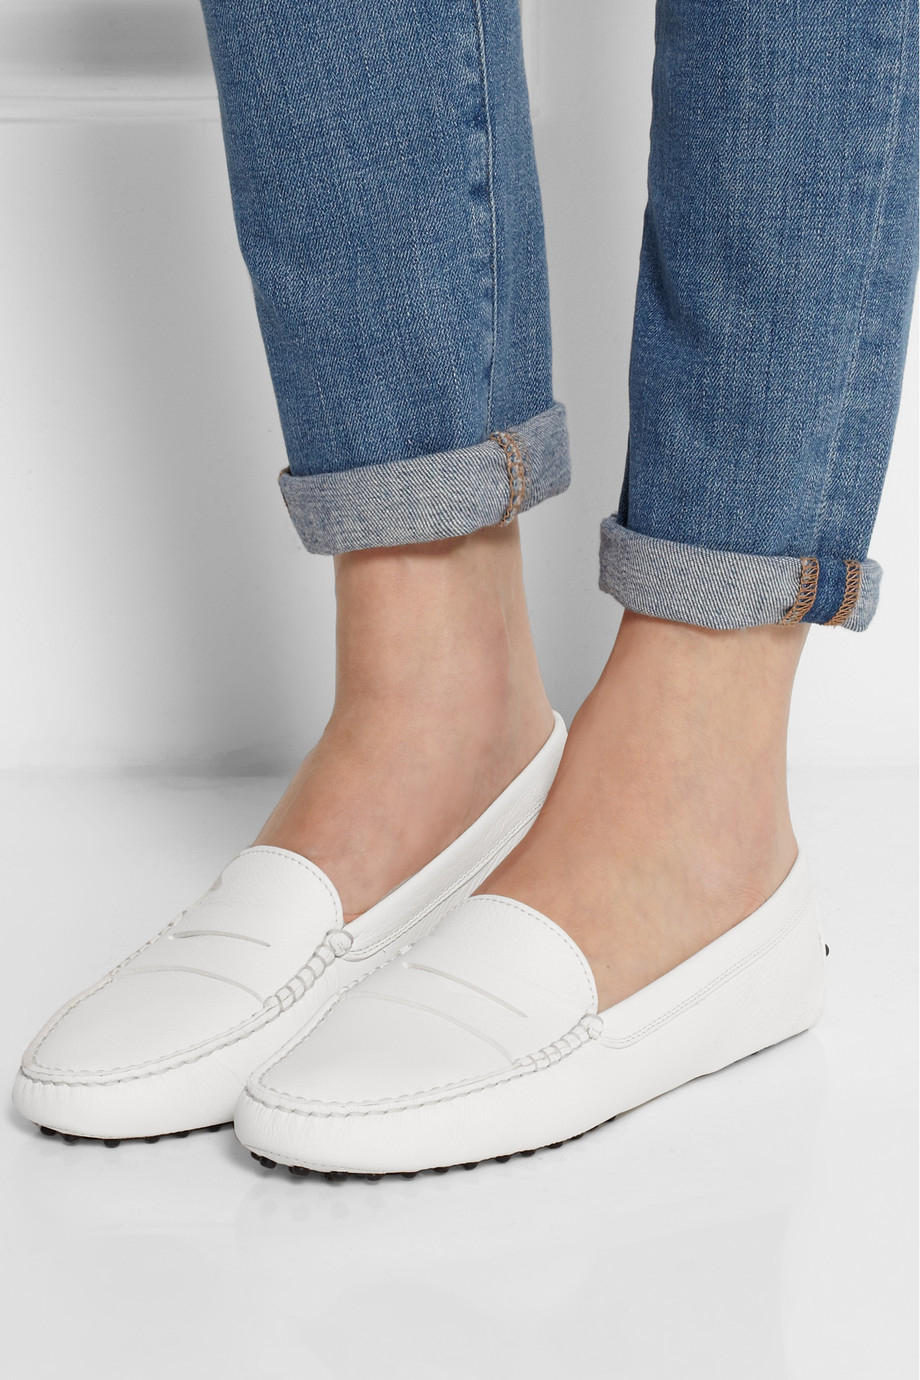 Tod's Gommino Leather Loafers in White 